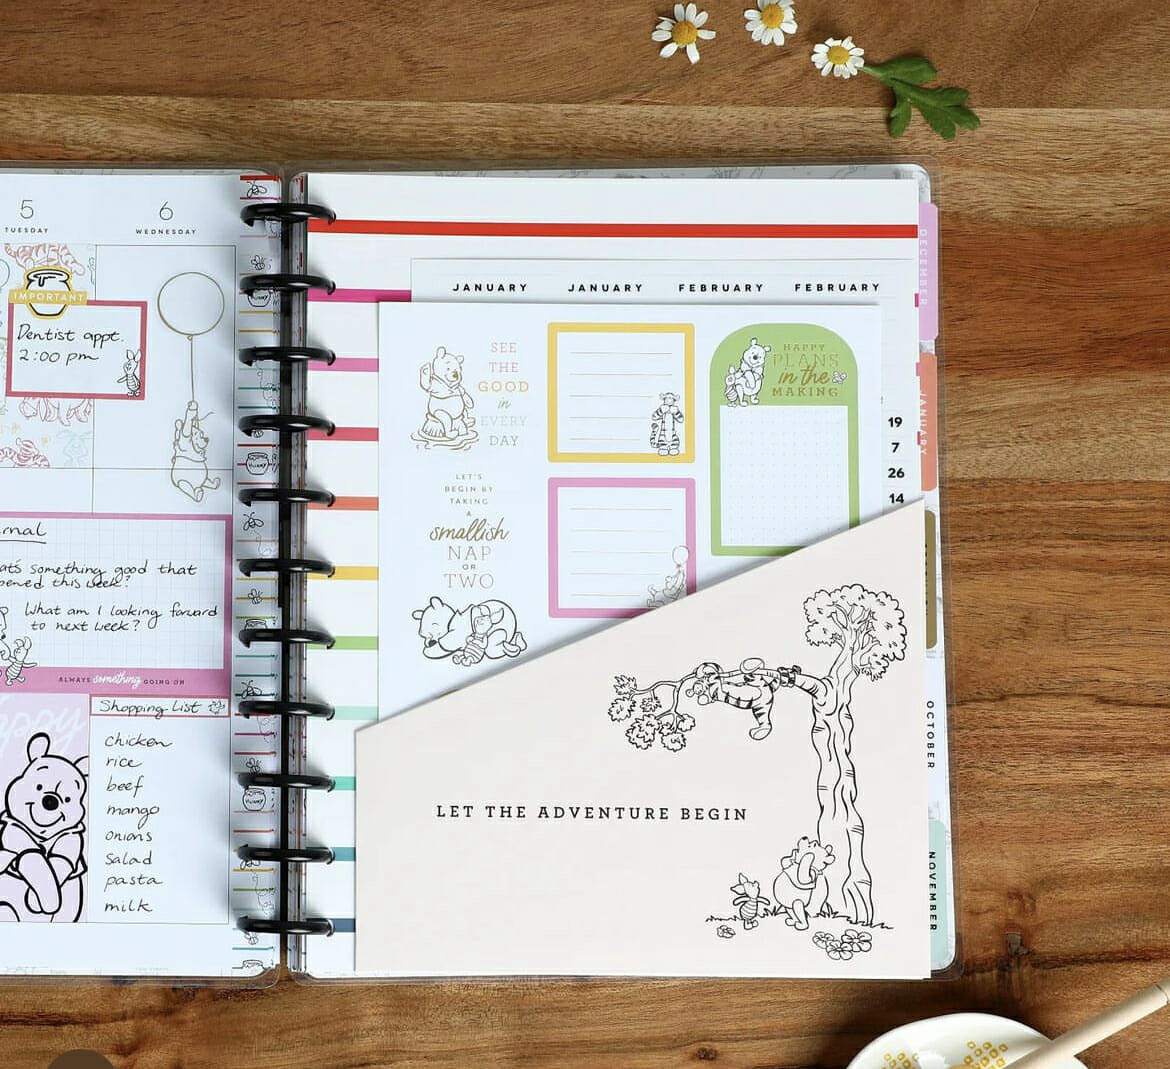 Organize your Life with The Happy Planner - other